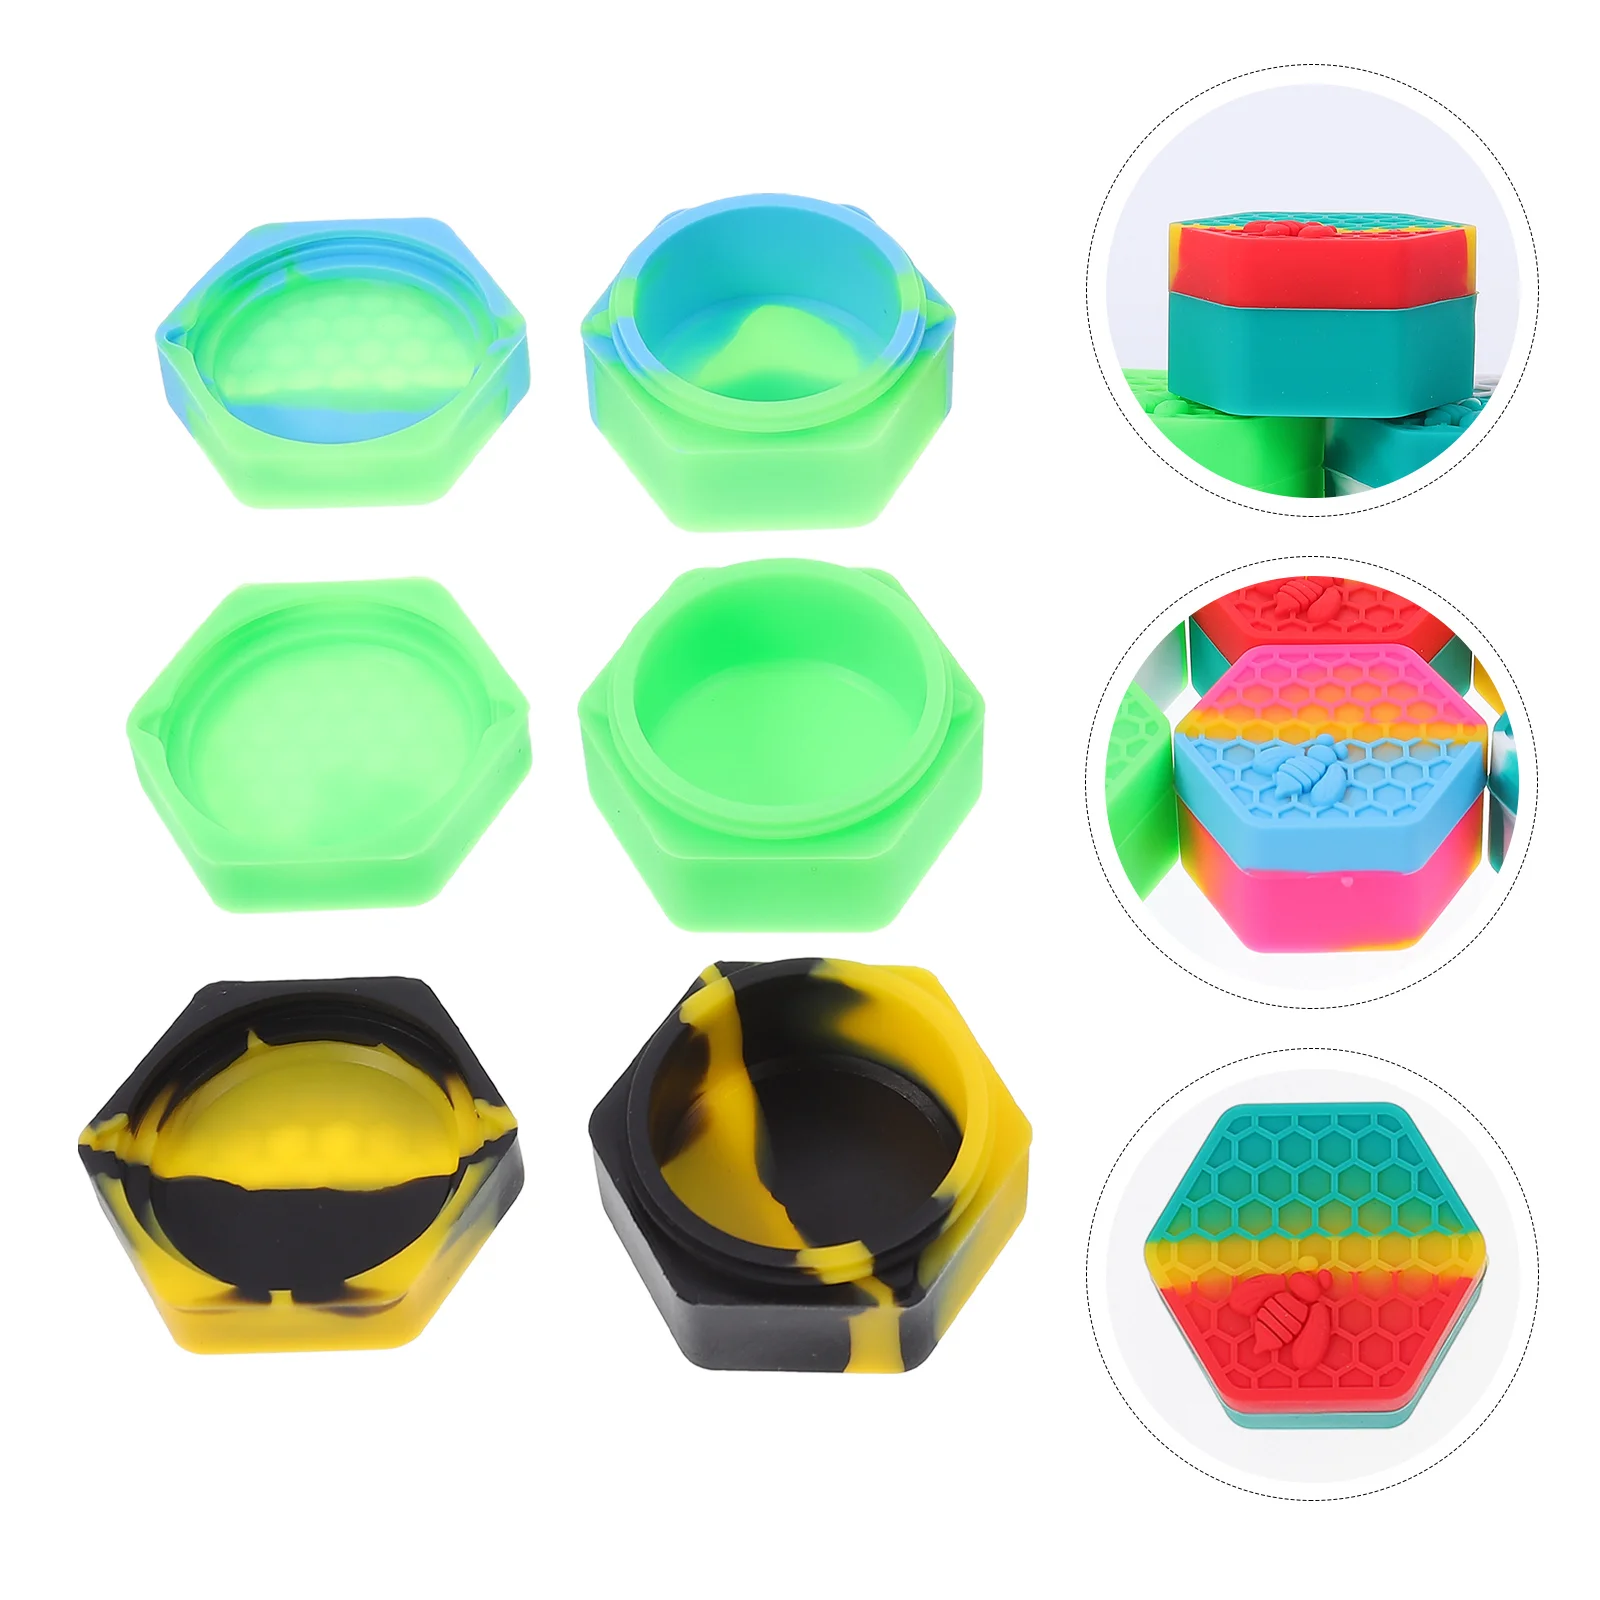 

Mold Holder Jar Silicone Containers Wax Jewelry Jarspencil Making Brush Planter Ashtray Soap Pot Cup Pen Candy Tealight